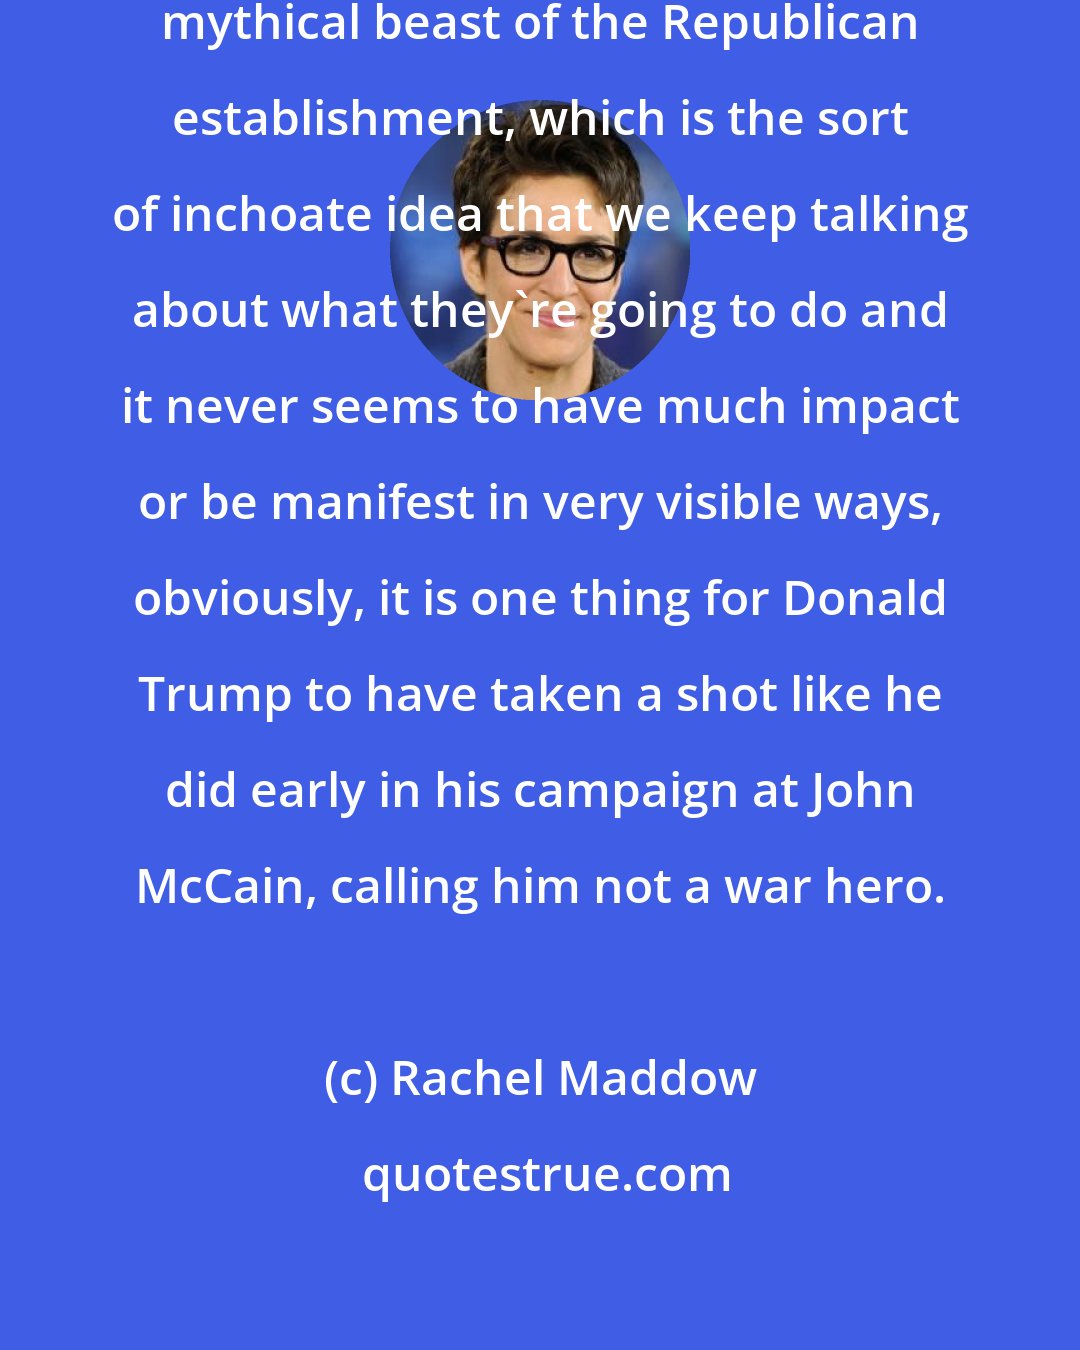 Rachel Maddow: What I`m starting to think of as the mythical beast of the Republican establishment, which is the sort of inchoate idea that we keep talking about what they`re going to do and it never seems to have much impact or be manifest in very visible ways, obviously, it is one thing for Donald Trump to have taken a shot like he did early in his campaign at John McCain, calling him not a war hero.